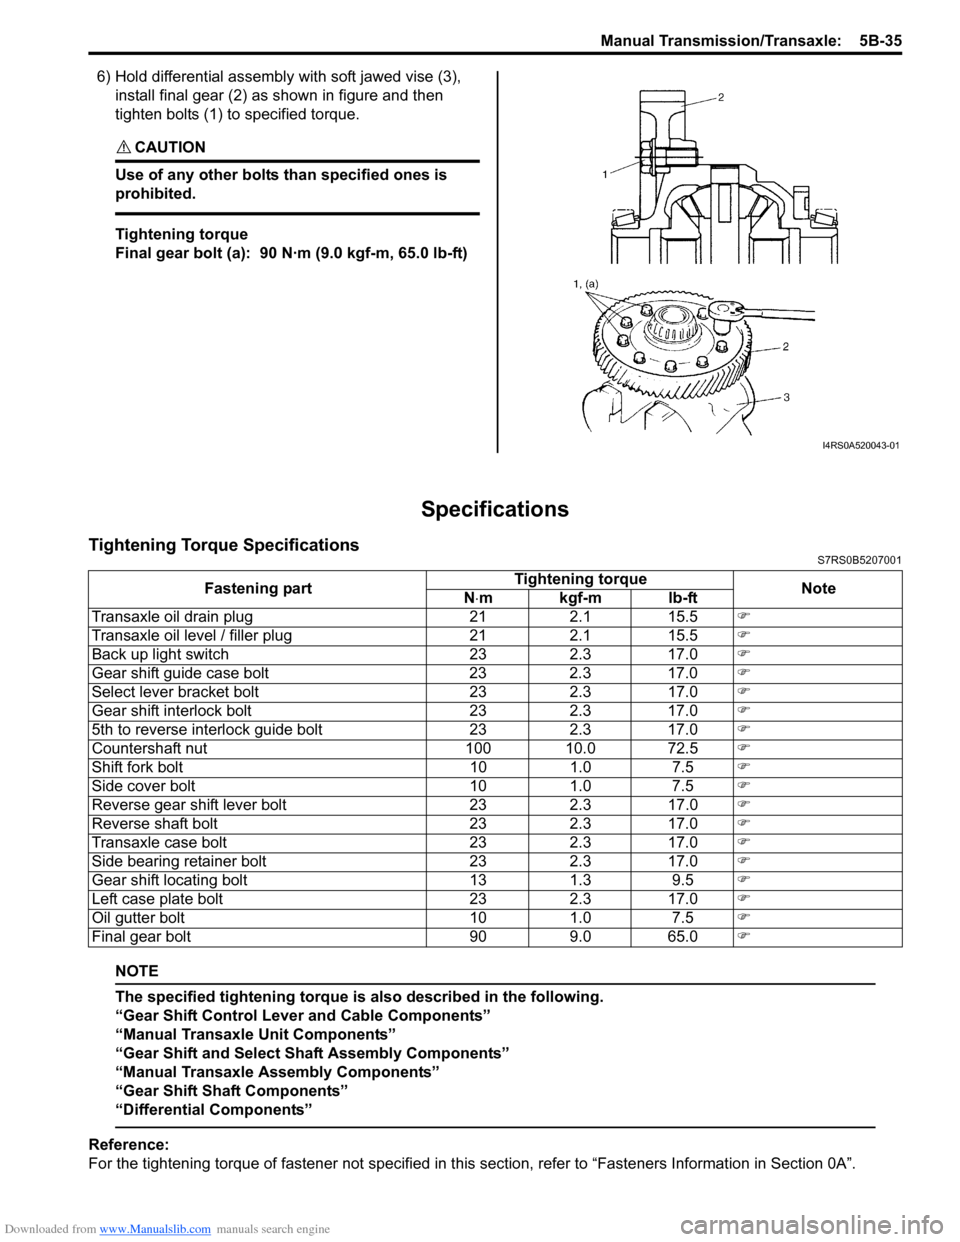 SUZUKI SWIFT 2004 2.G Service Service Manual Downloaded from www.Manualslib.com manuals search engine Manual Transmission/Transaxle:  5B-35
6) Hold differential assembly with soft jawed vise (3), 
install final gear (2) as shown in figure and th